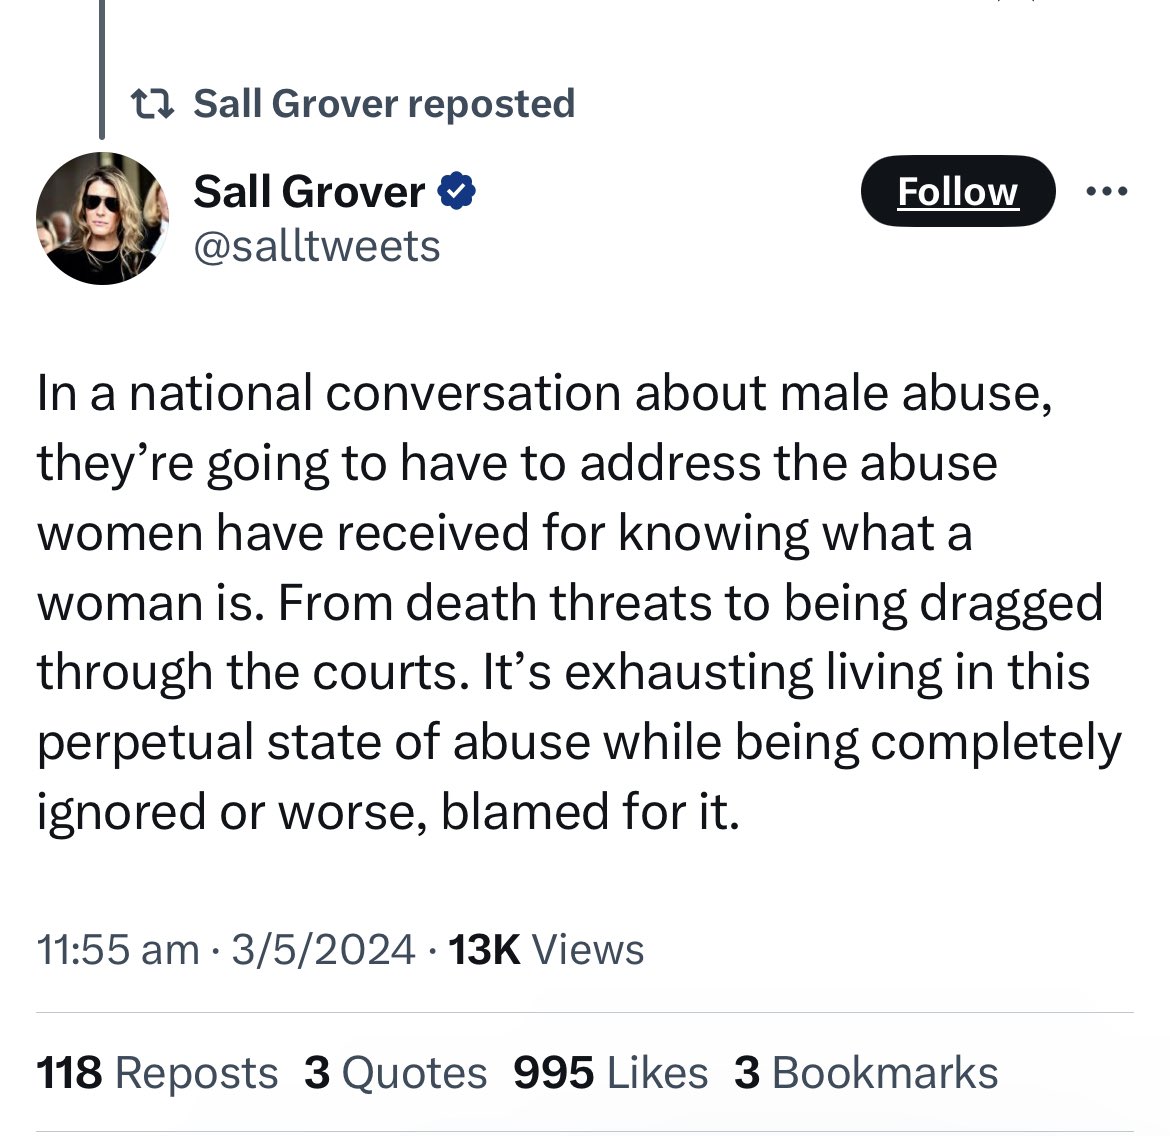 Sall Grover unashamedly compares herself to FDV & murder victims and describes an AHRC complaint as being “dragged through the courts” & claims she’s exhausted from living in a “perpetual state of abuse”.
Her privilege, arrogance and sense of entitlement is disgusting & enraging.